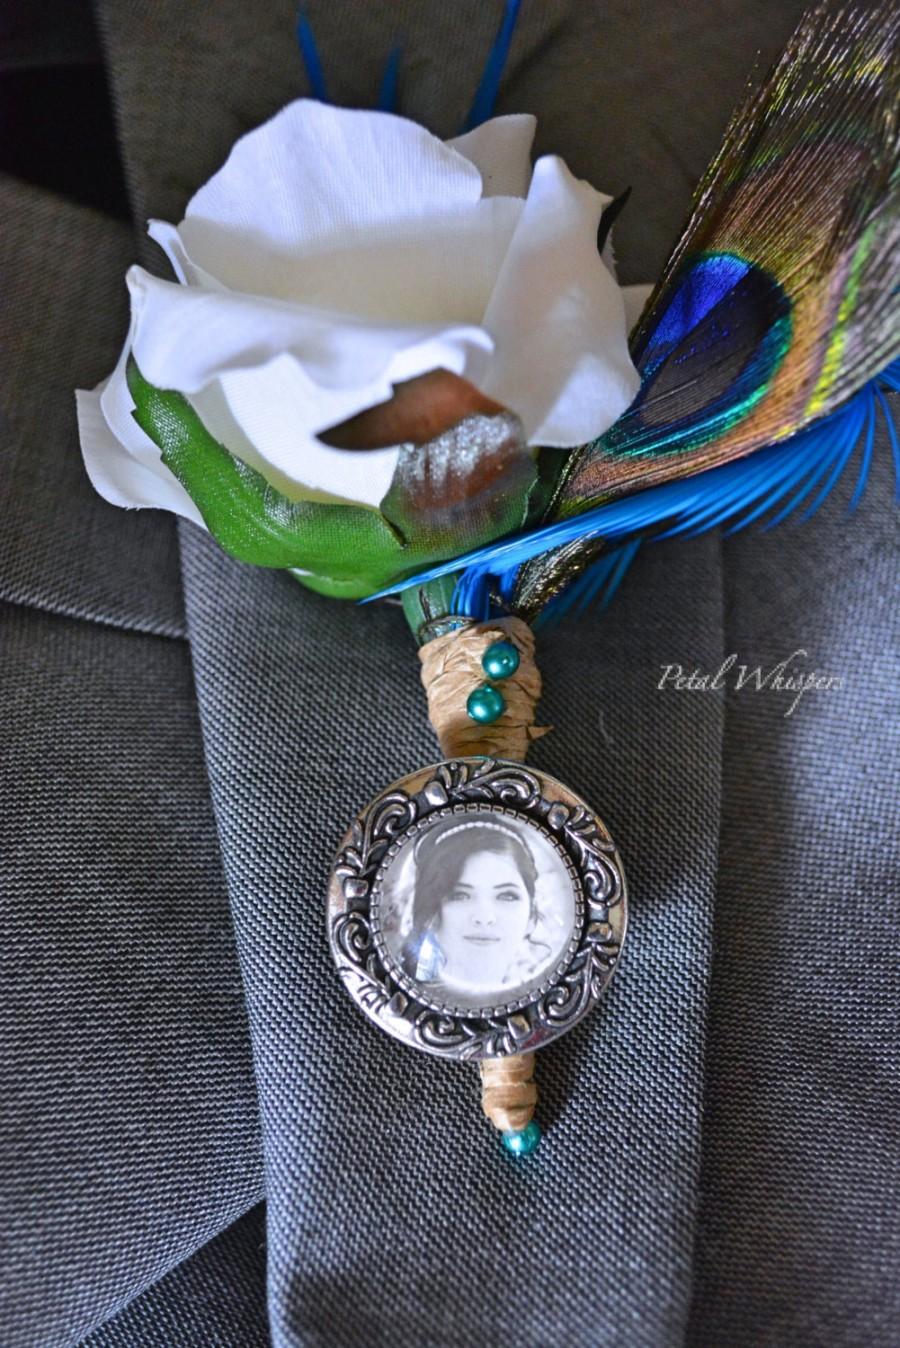 Wedding - Grooms Boutonniere Pendant, Memorial Pin, Grooms Gift, Bouquet Photo Brooch, Lapel Pin, Wedding Memory Pendant Brooch, Boutonniere Pendant